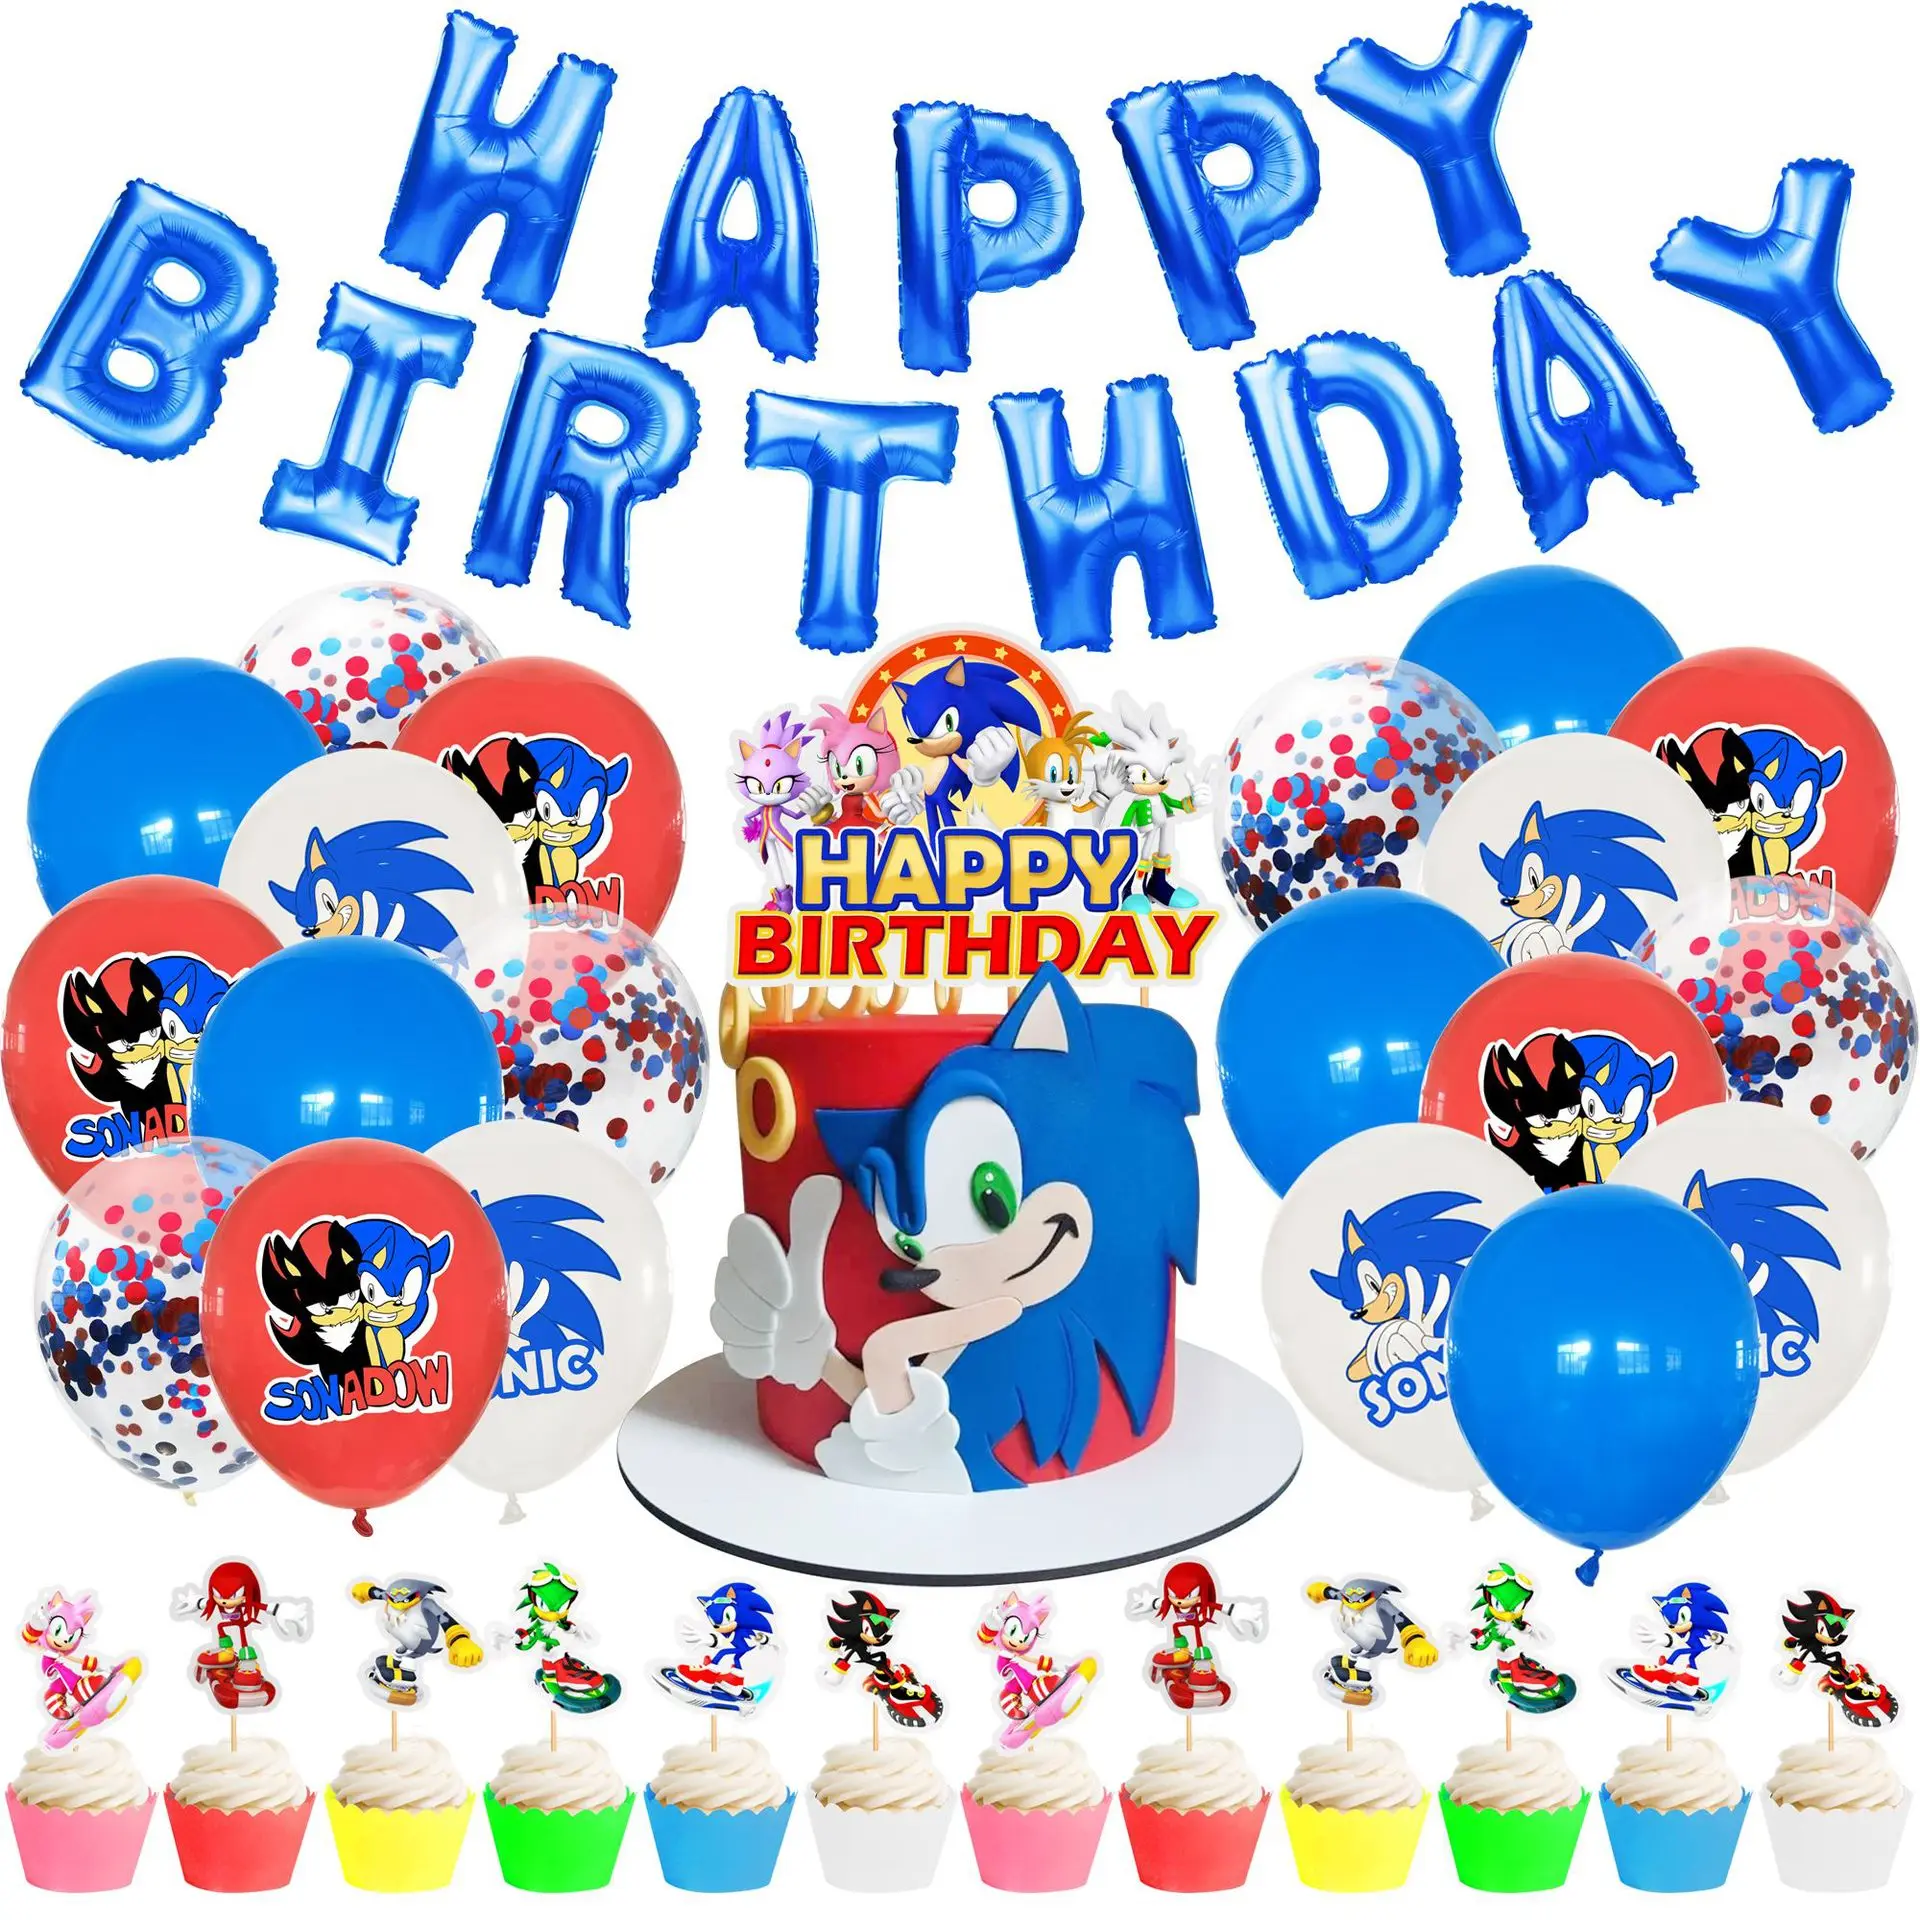 hedgehog sonic birthday party supplies banner